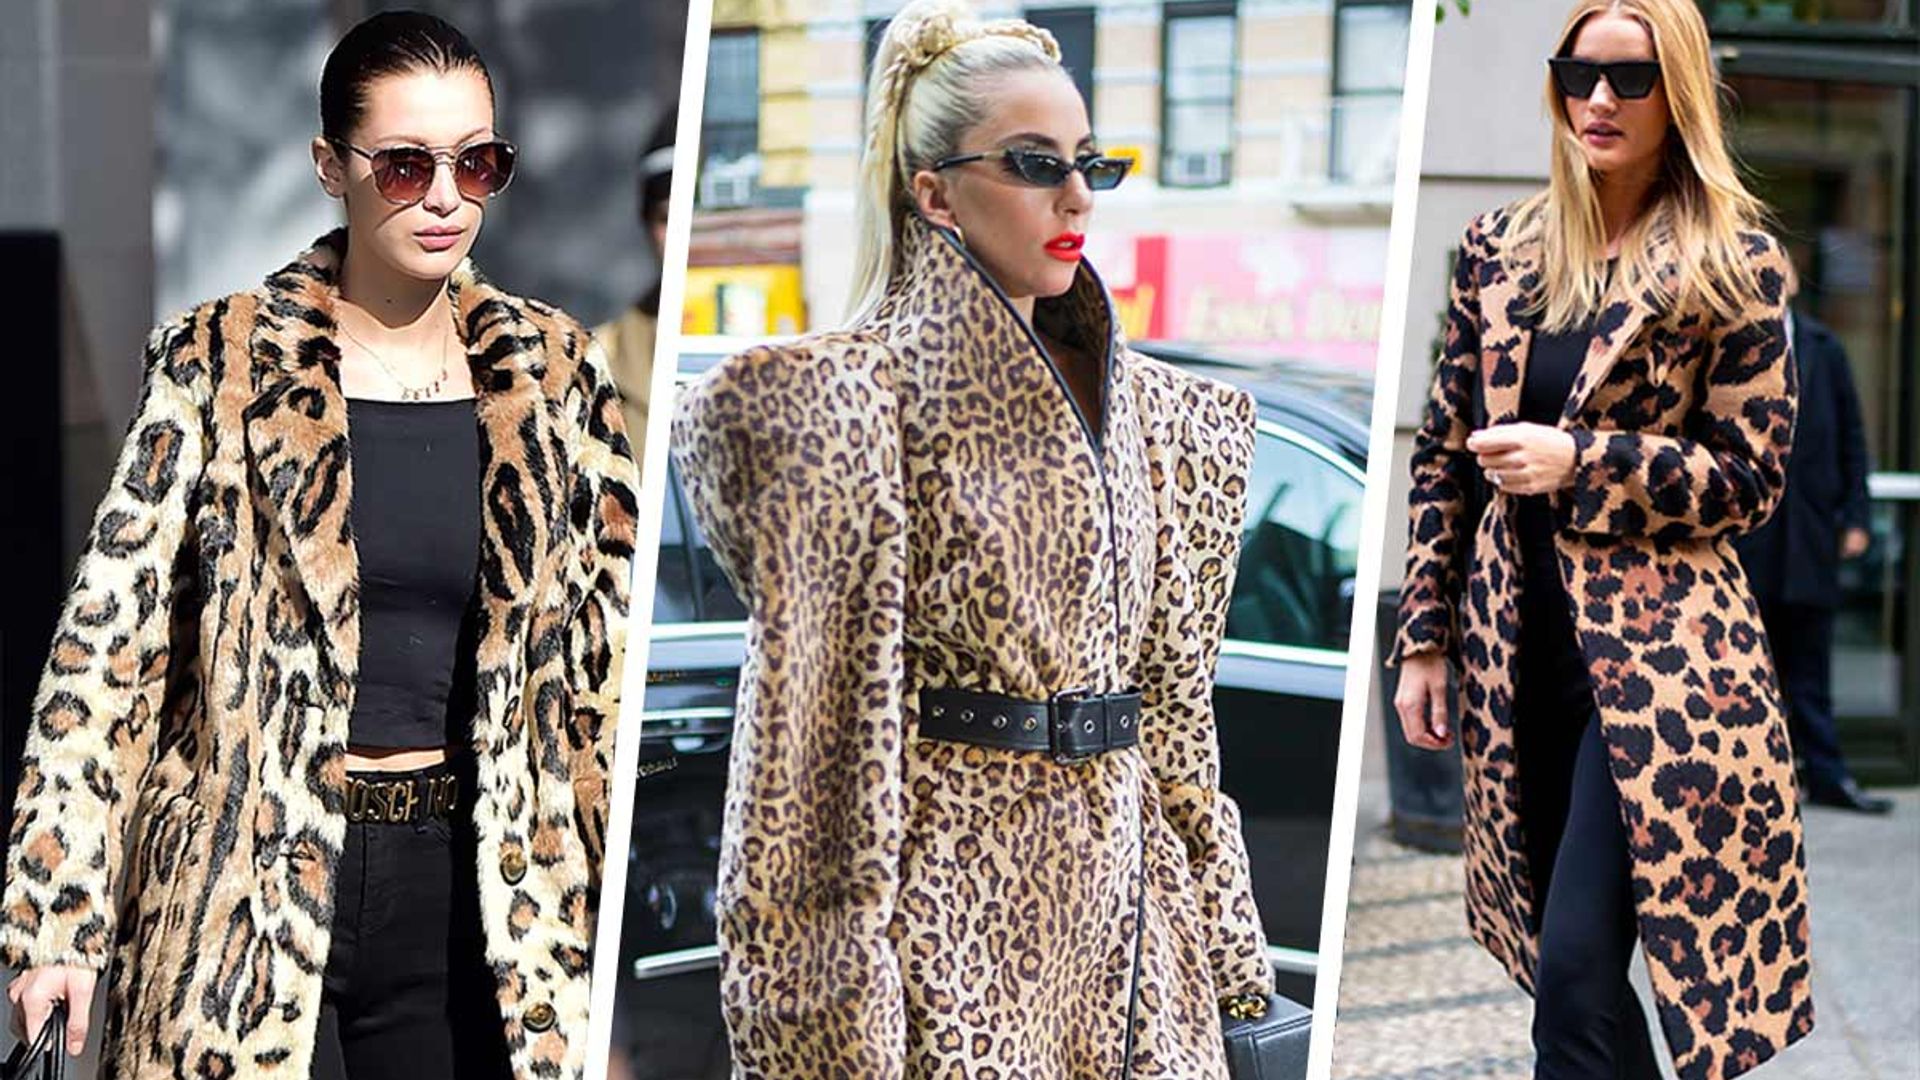 8 best leopard print coats for 2022 - inspired by Adele, Bella Hadid, Lady Gaga & MORE